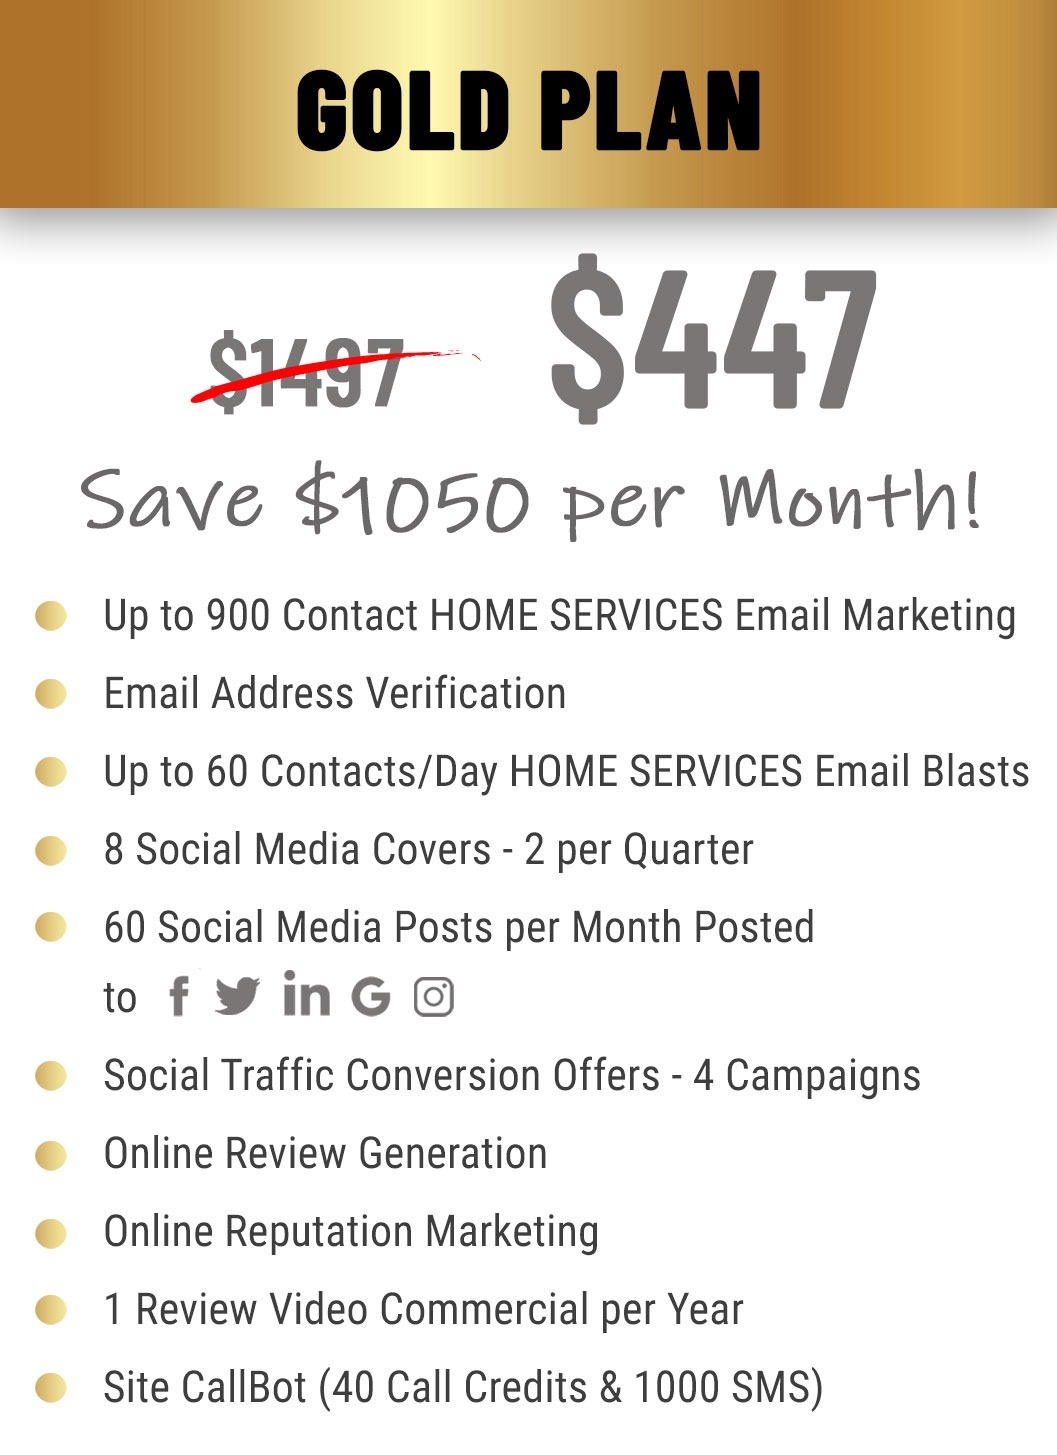 gold plan $447 per month pricing and features for home service contractors.